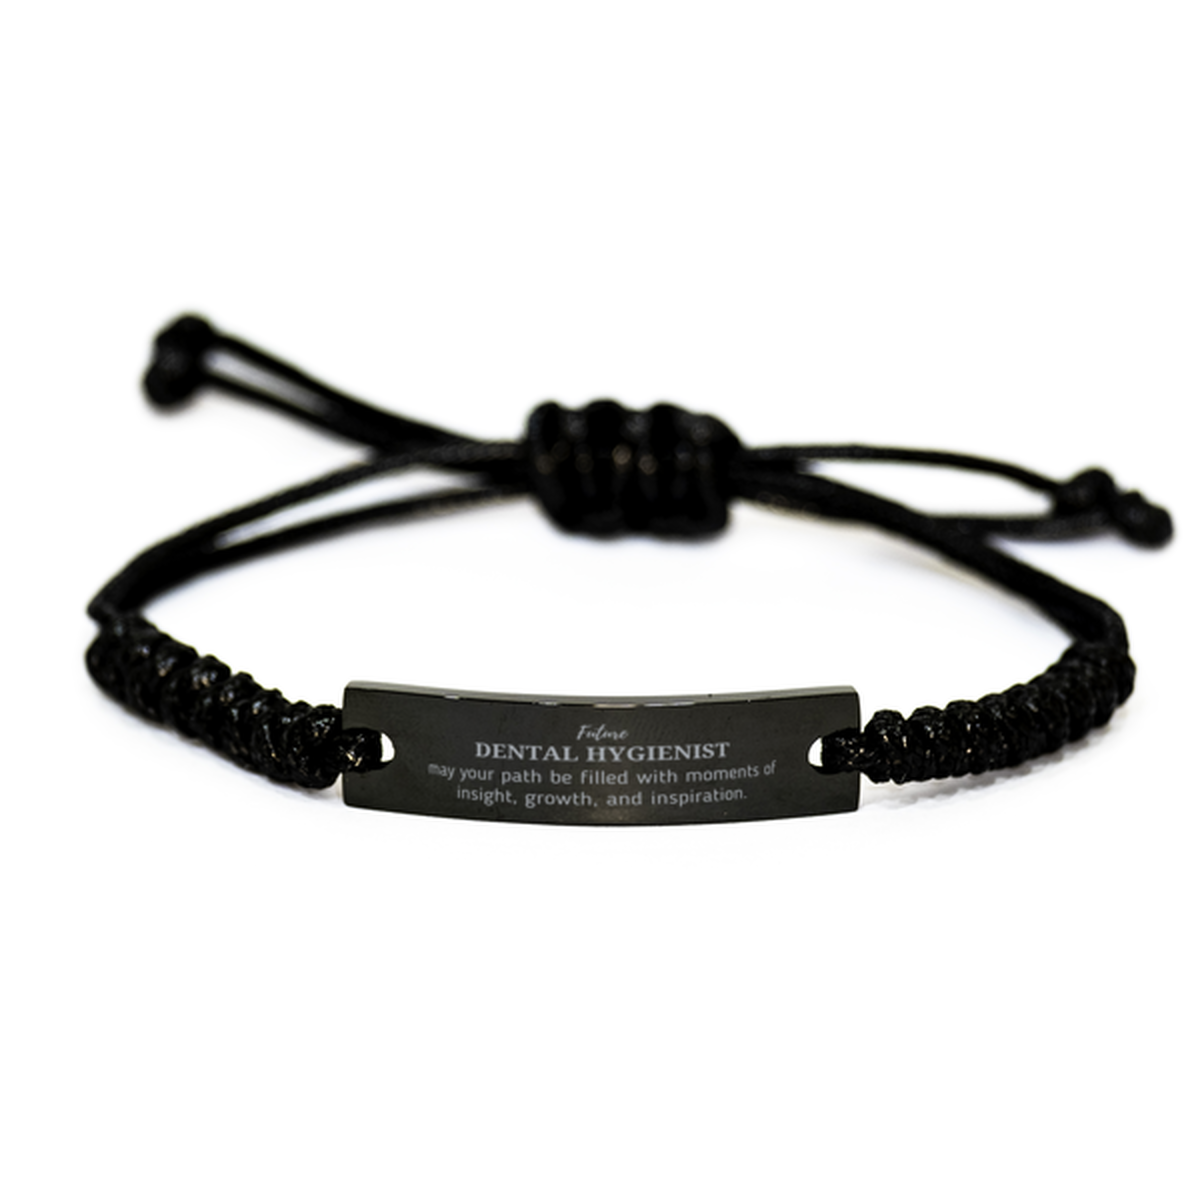 Future Dental Hygienist Gifts, May your path be filled with moments of insight, Graduation Gifts for New Dental Hygienist, Christmas Unique Black Rope Bracelet For Men, Women, Friends